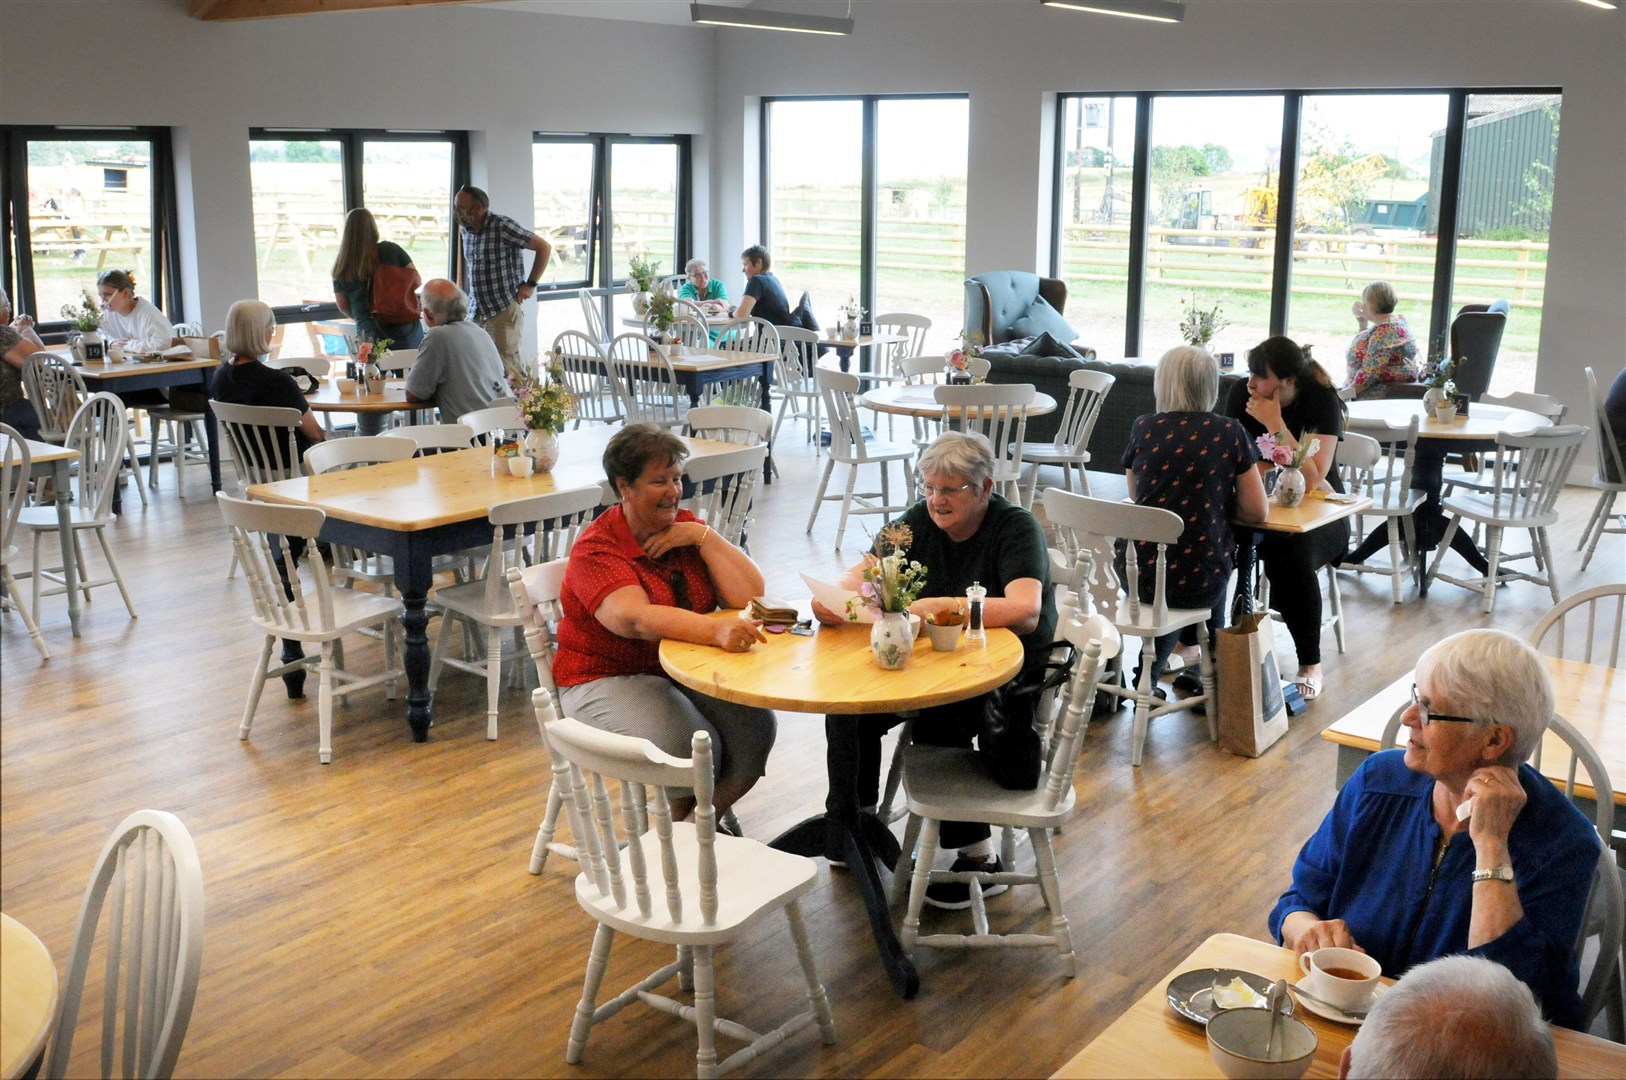 Dalmore Farm opened its doors on the 26th of July 2021: The cafe interior.Picture: James Mackenzie.